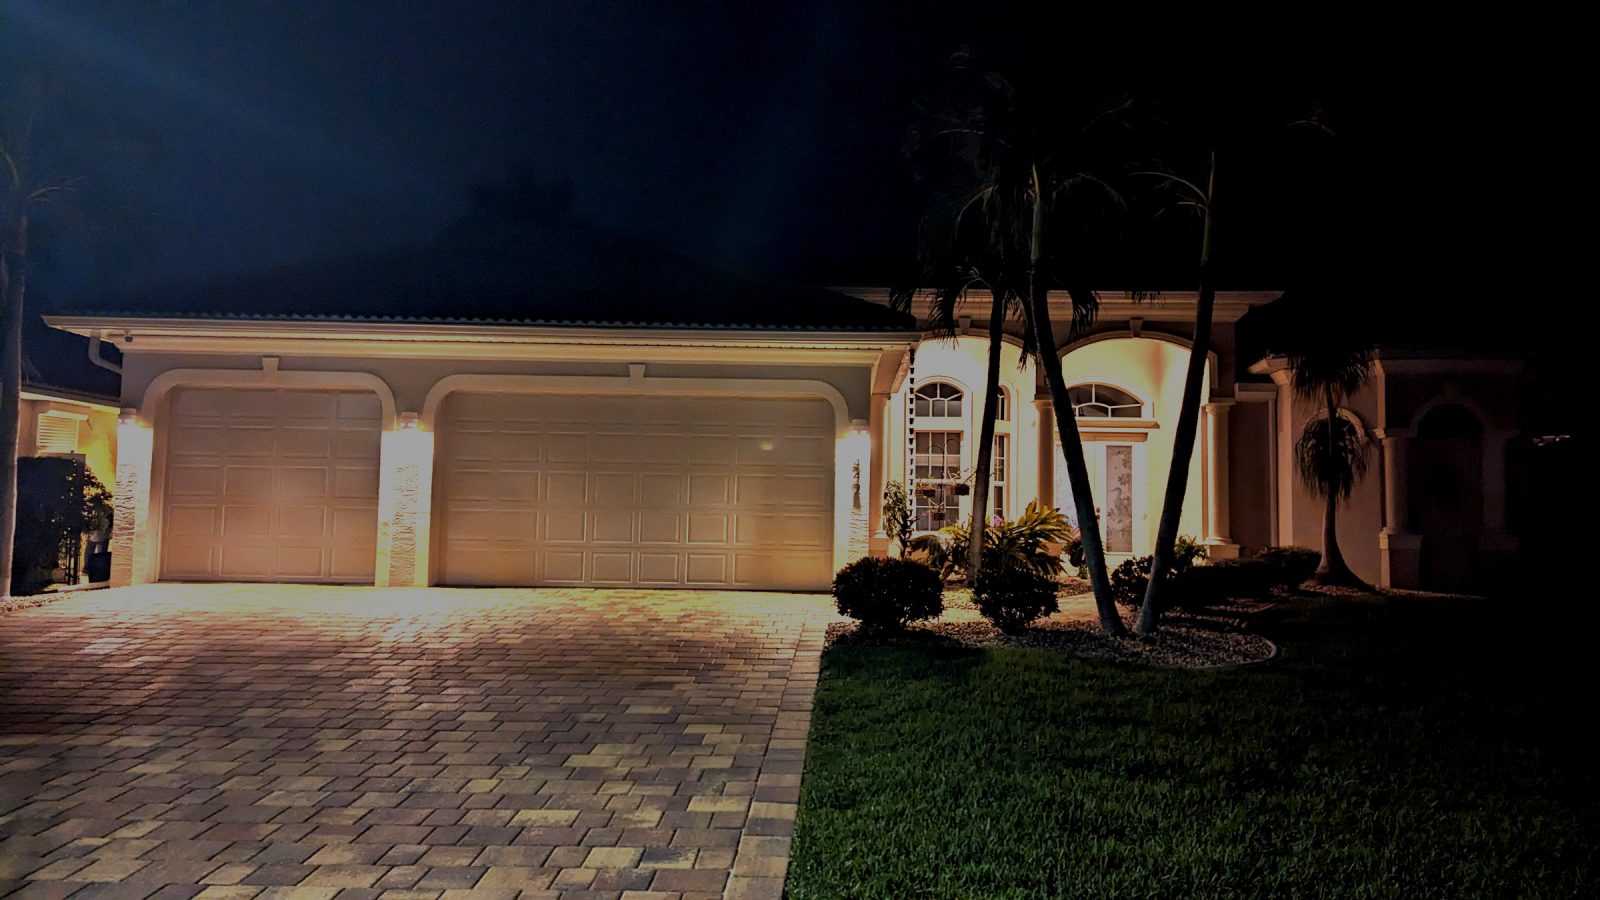 1442 SW 54th Terrace, Cape Coral, FL 33914 For Sale, at night